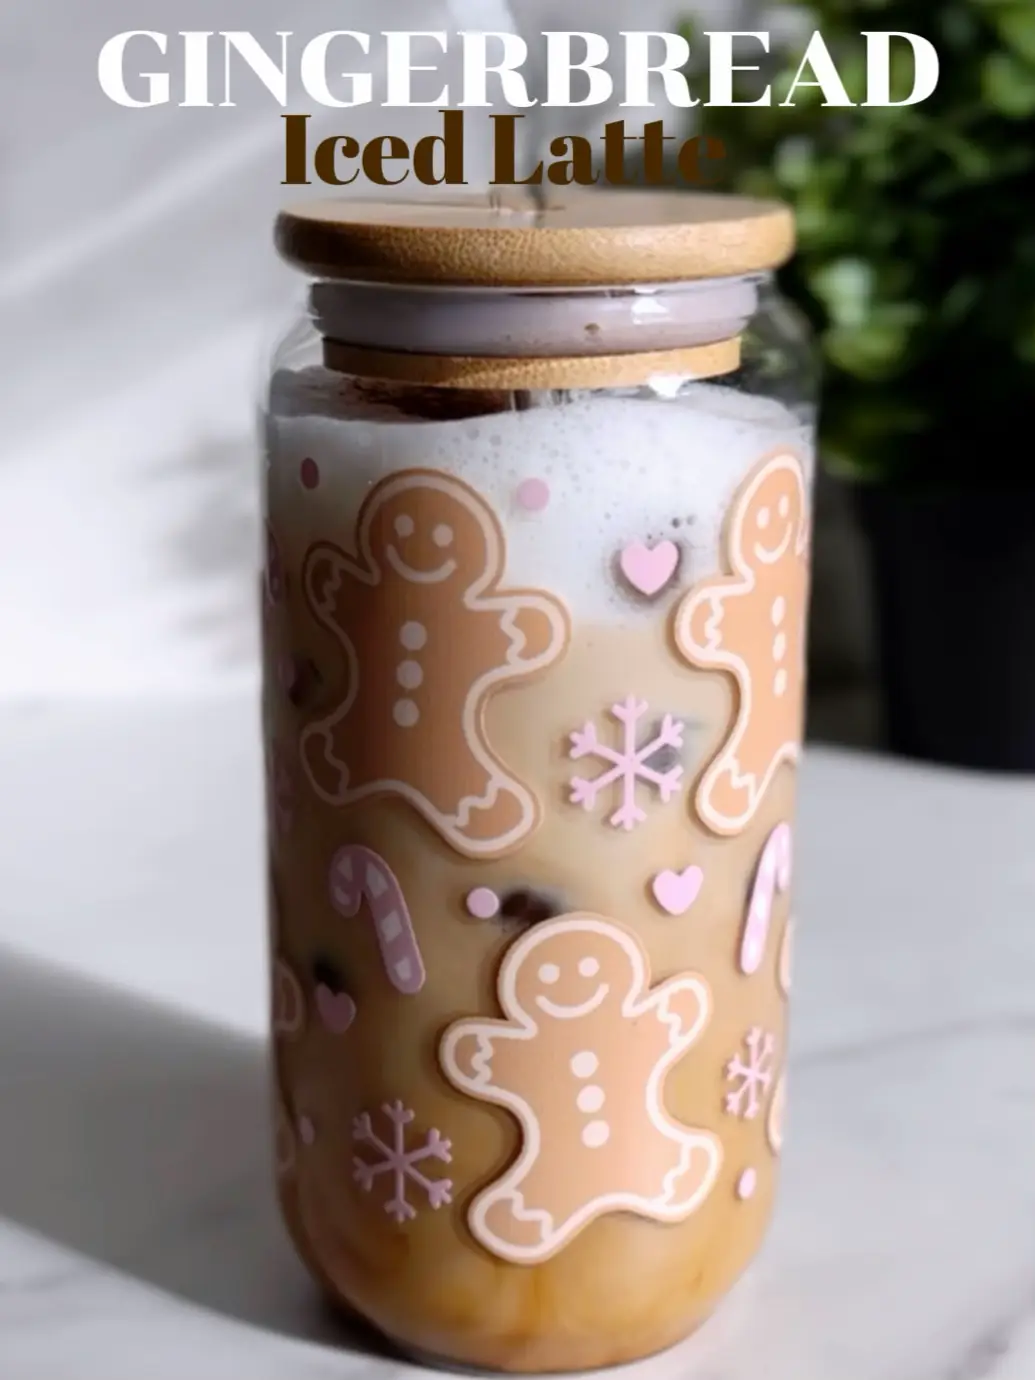  A jar of Ginger bread Iced Latte.